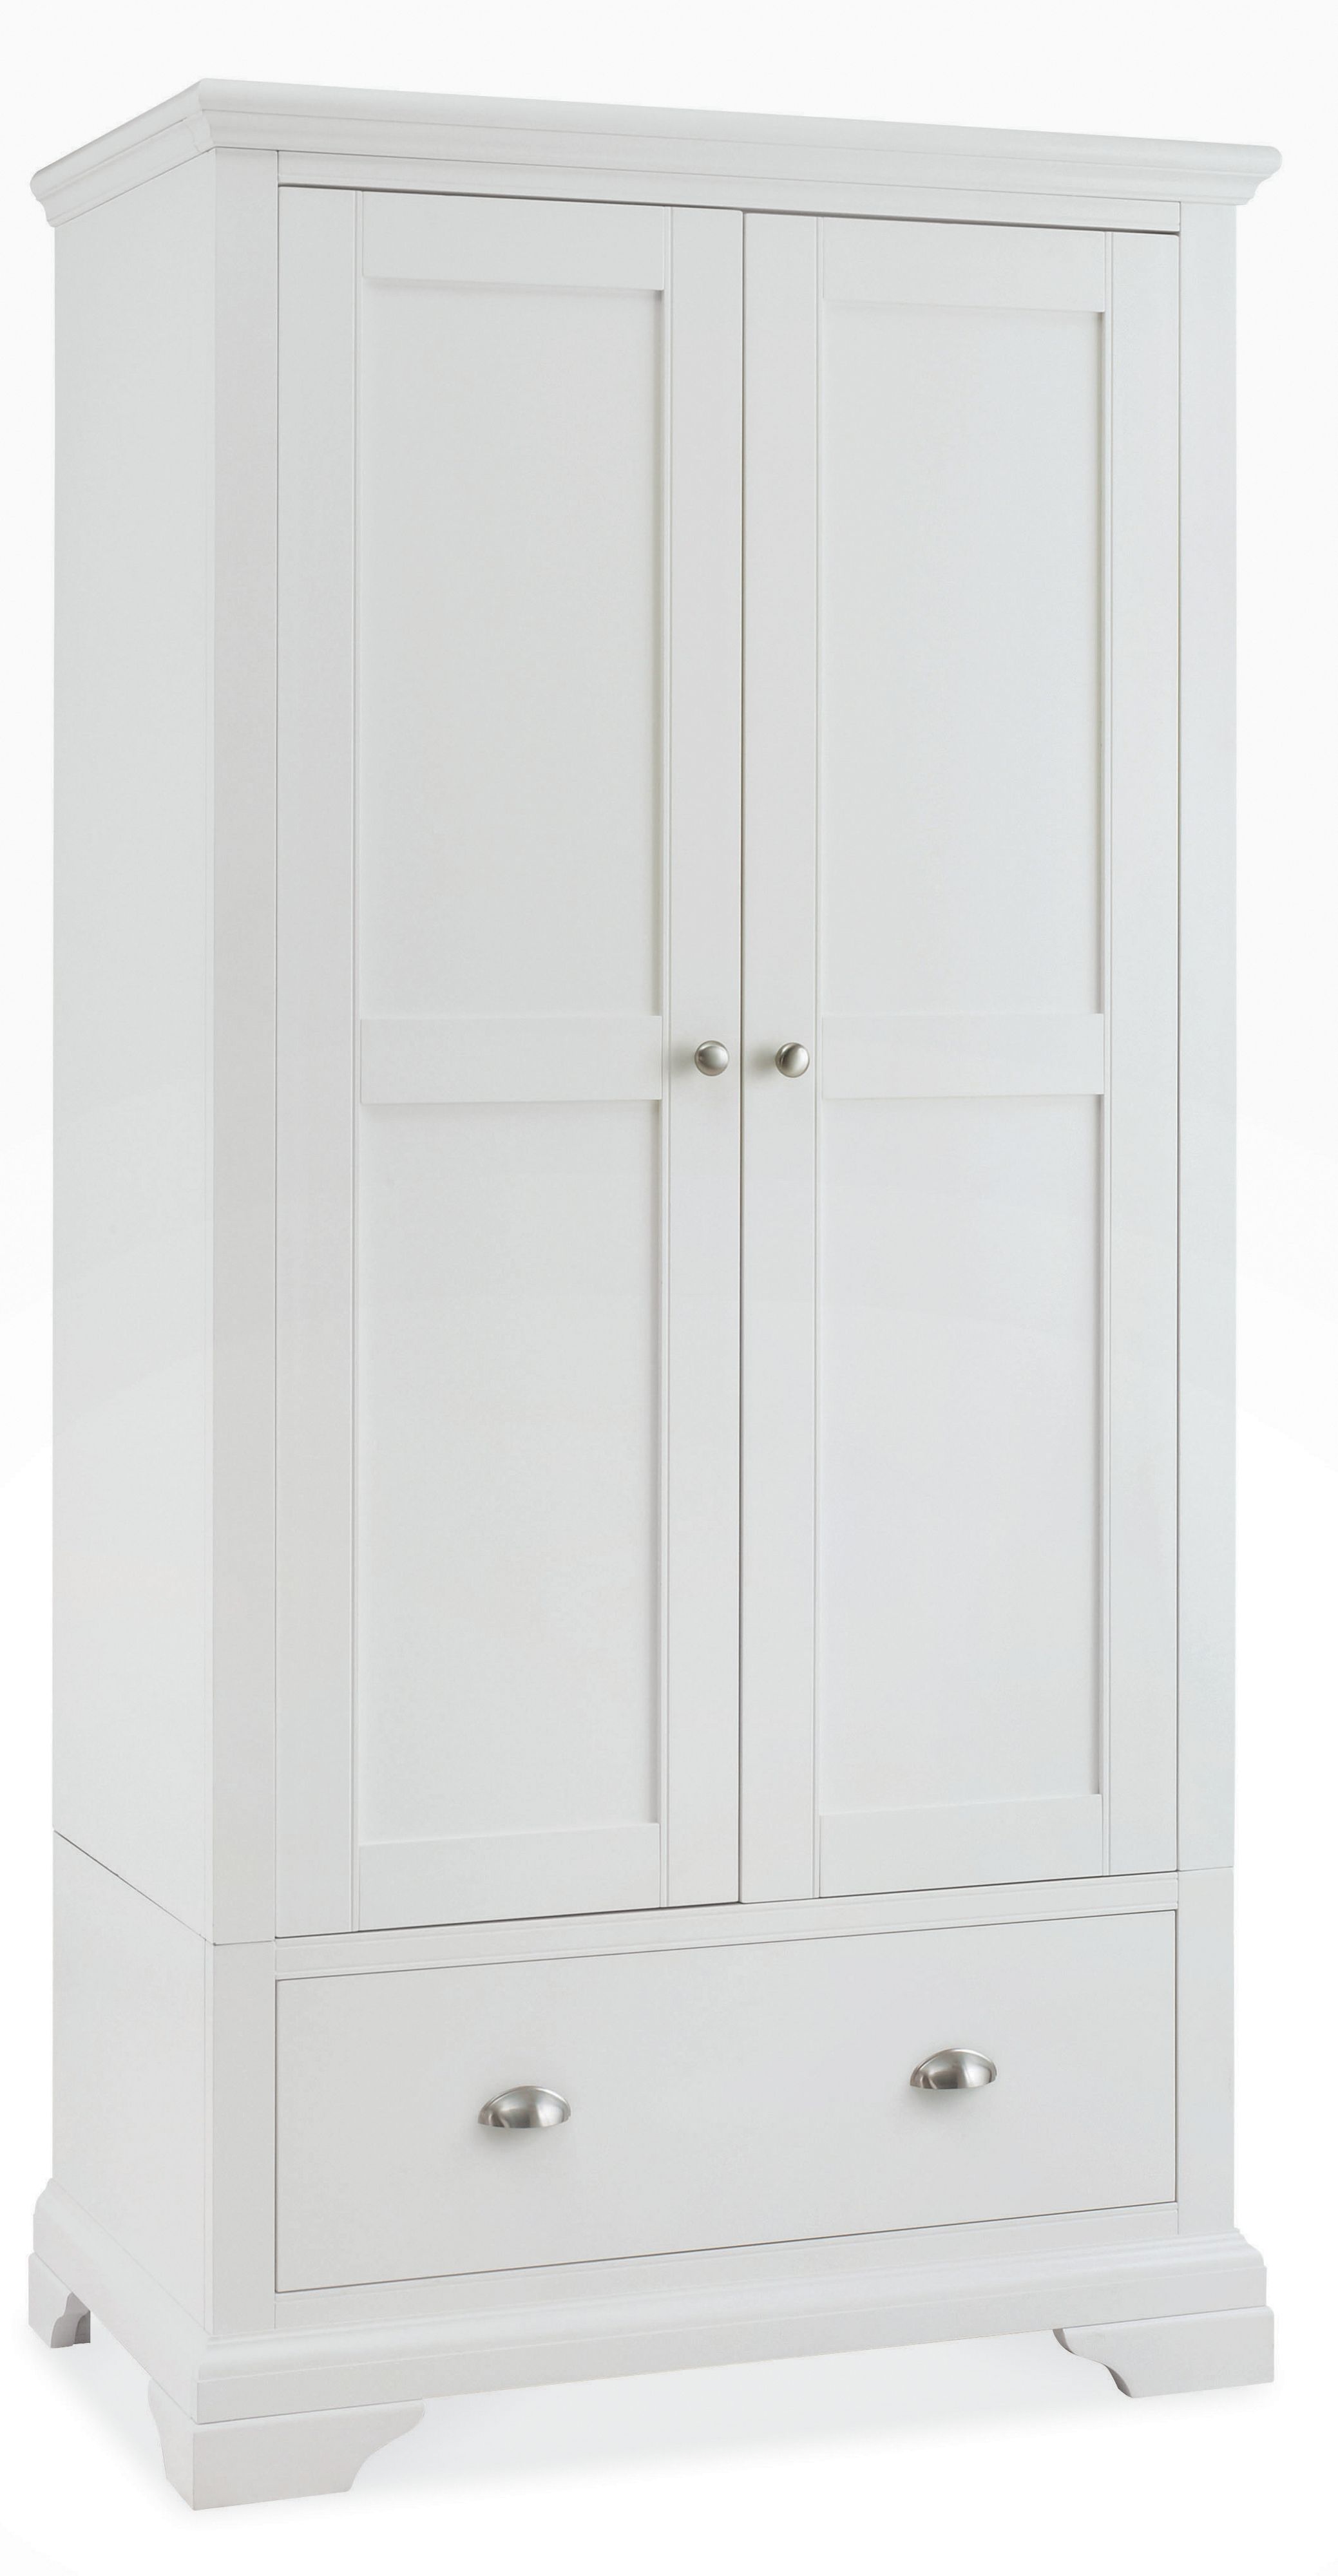 white wardrobes linea etienne white double wardrobe with drawer - house of fraser SBWMKAY